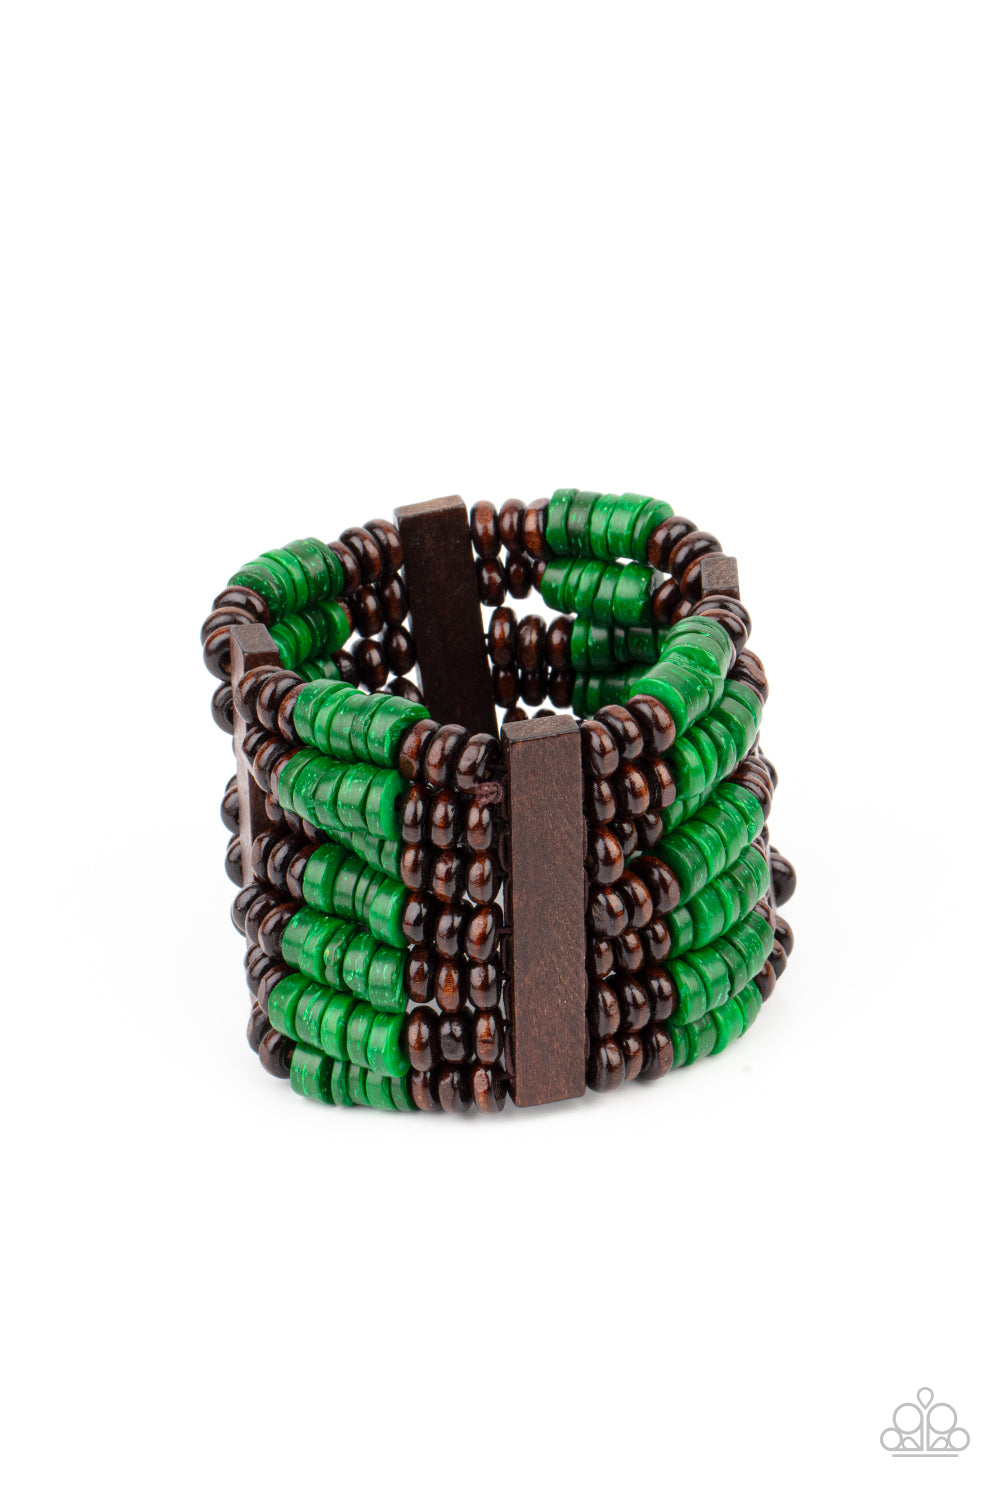 Vacay Vogue - Green Item #P9SE-GRXX-155XX Held together by rectangular wooden frames, rows of brown wooden and distressed Leprechaun discs are threaded along stretchy bands around the wrist for a seasonal pop of color around the wrist.  Sold as one individual bracelet.